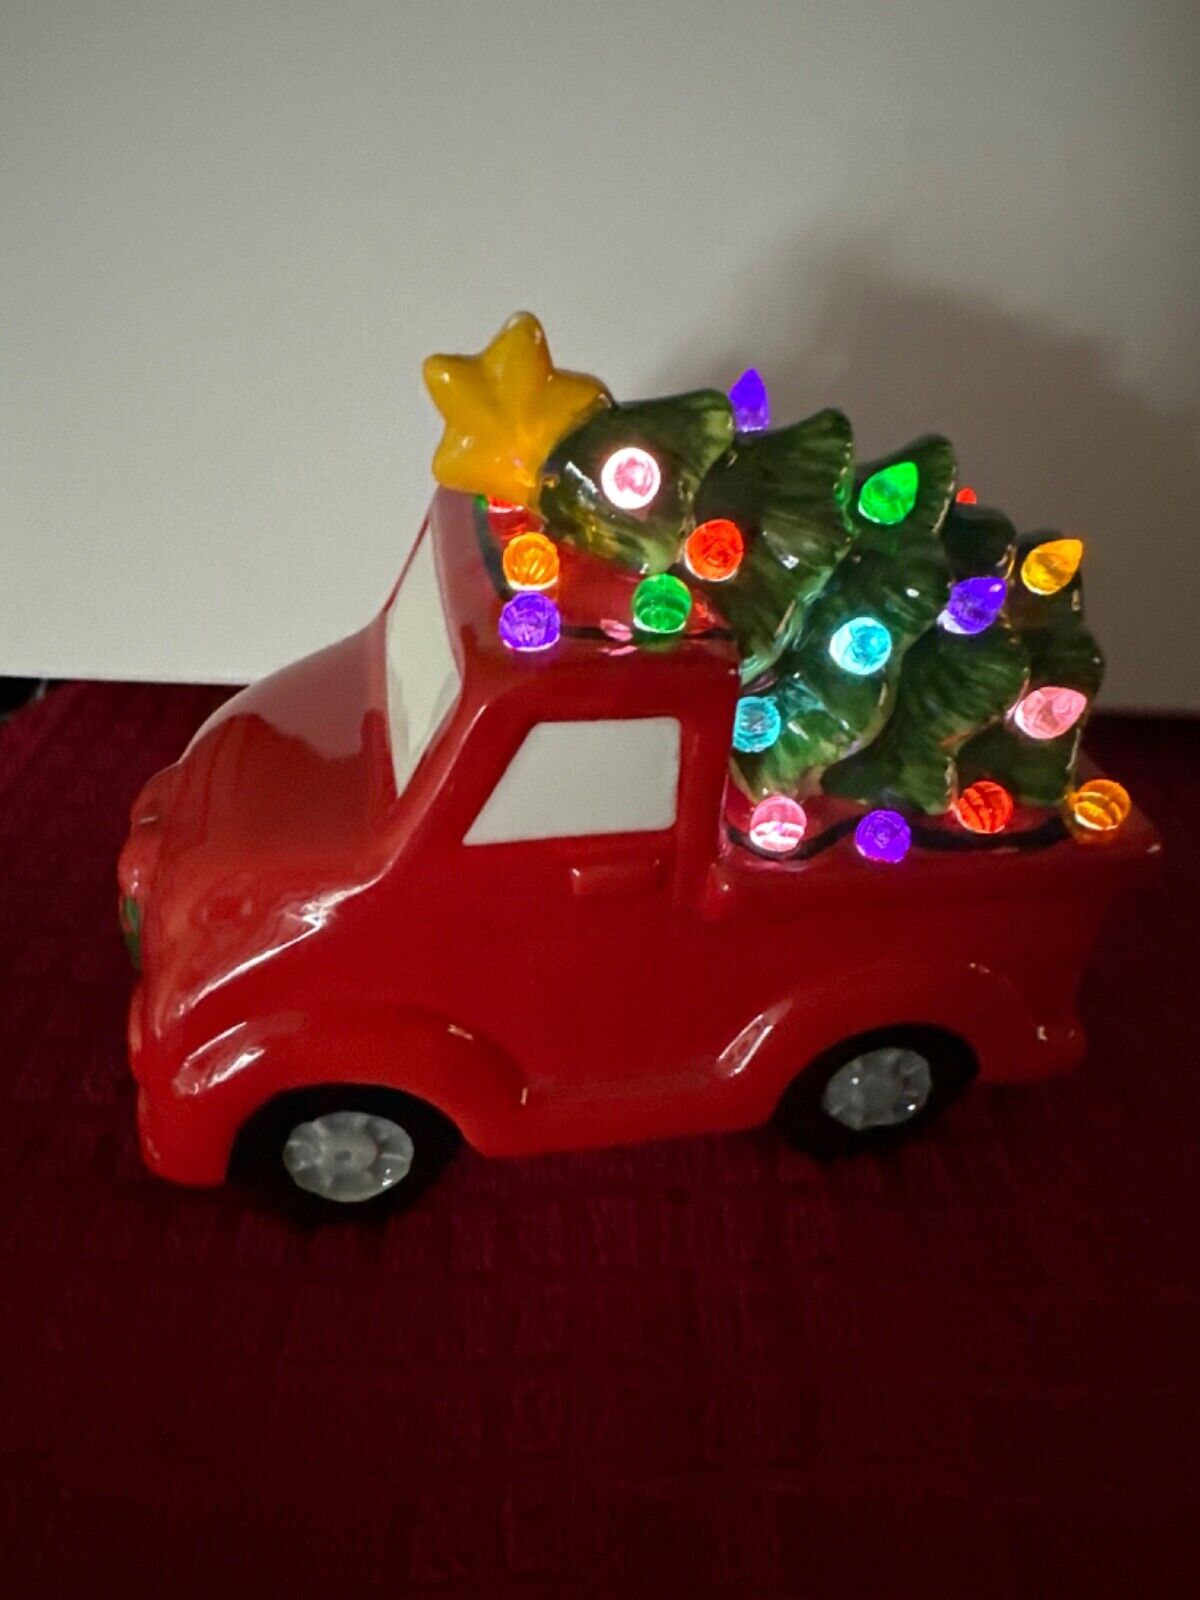 Ceramic Christmas Tree and Vintage Truck Battery Powered Holiday Tabletop Decor.